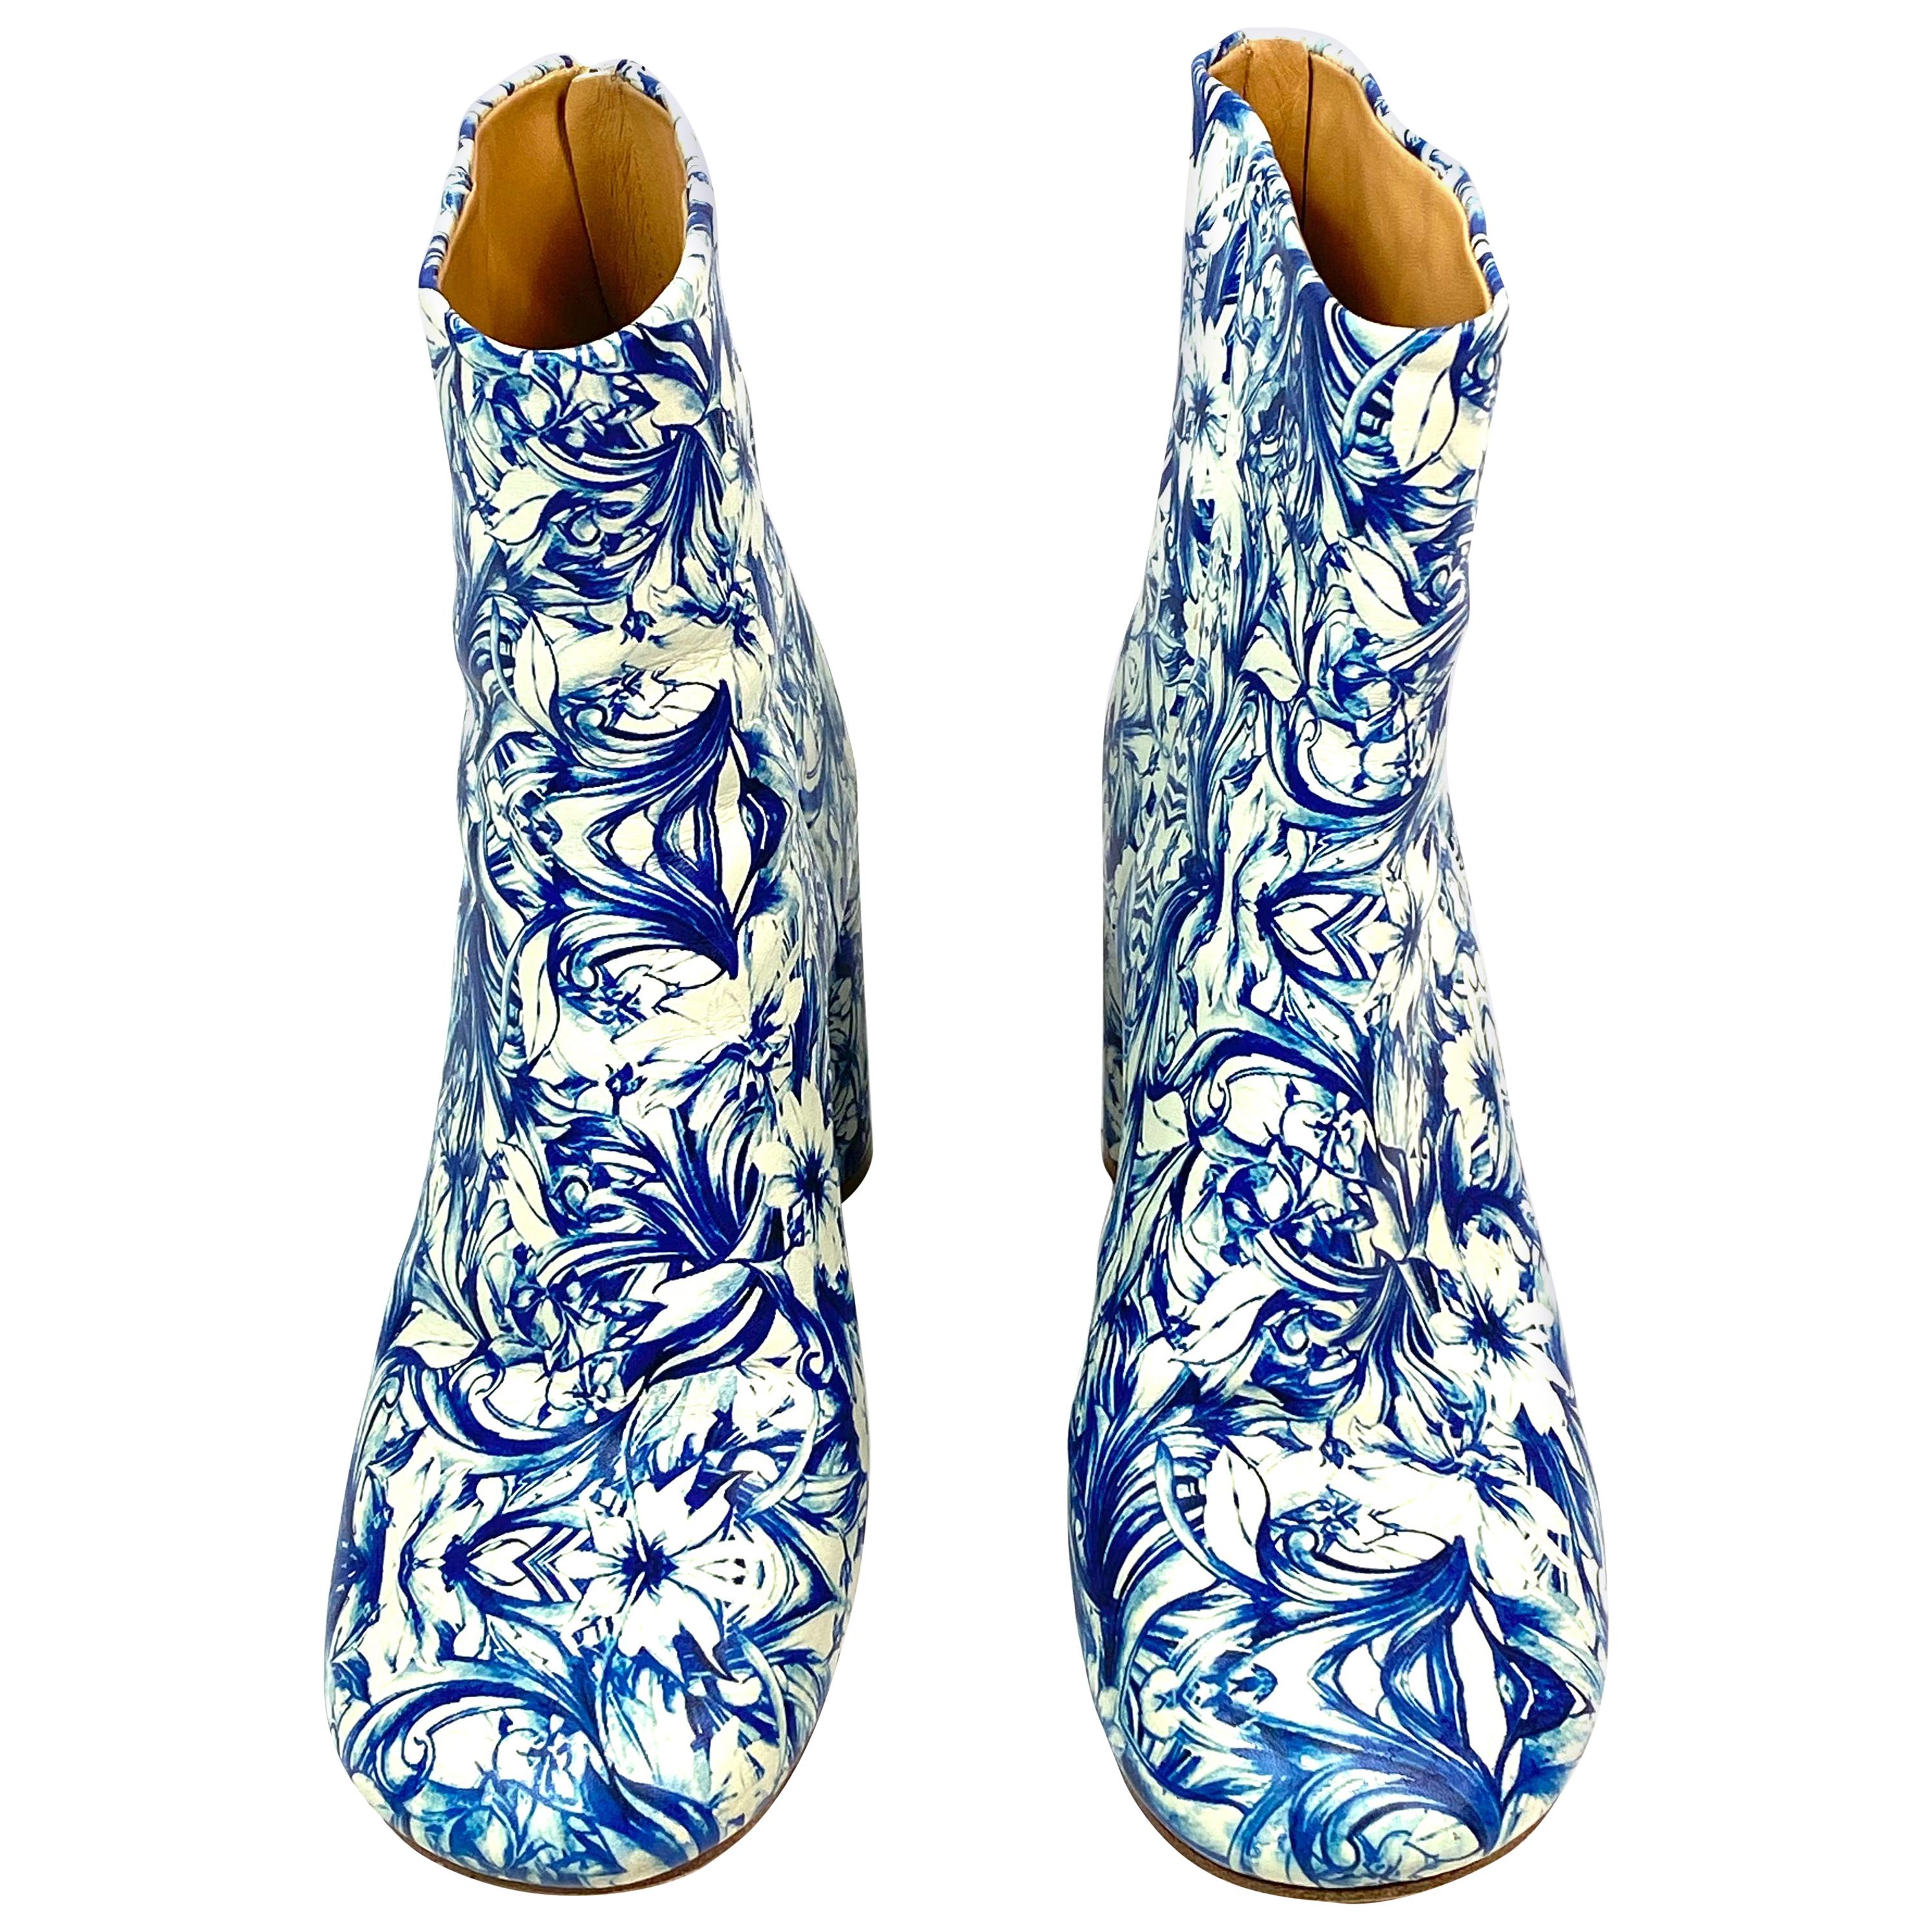 MAISON MARGIELA White and Blue Floral Print Leather Block Heel Booties SIZE 38.5